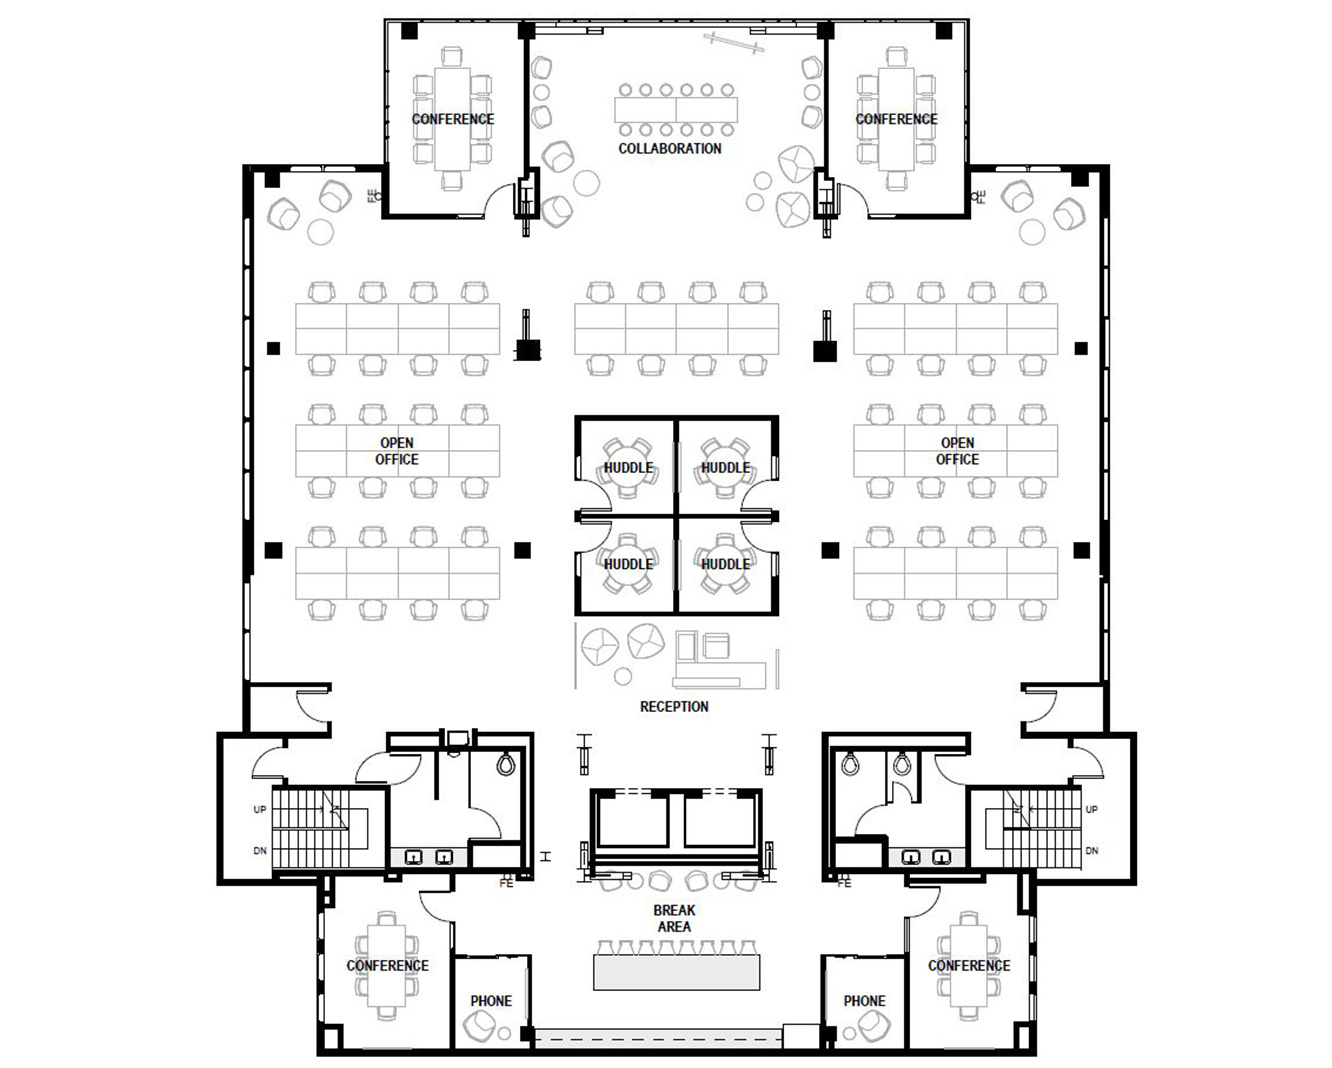 Hypothetical Floor Plan with Conceptual Furniture Layout for Suite 500